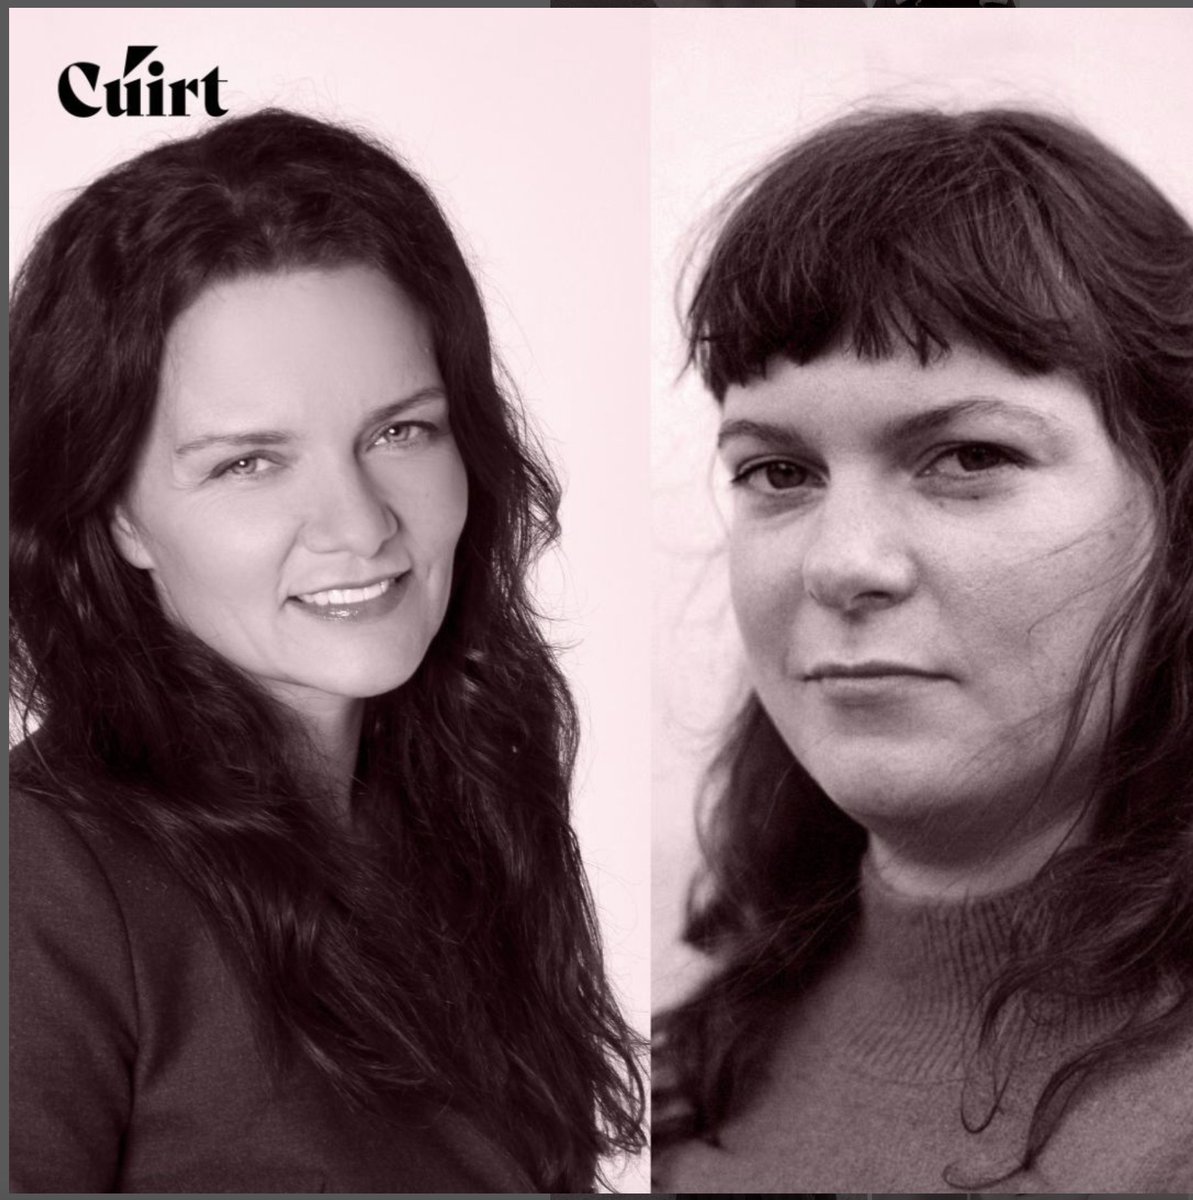 THE CONVERSATION is coming to @CuirtFestival this Tuesday at 9pm at the Hardiman Hotel in Galway, featuring Jo Burns & @Emily_S_Cooper, MC'd by @JessicaTraynor6